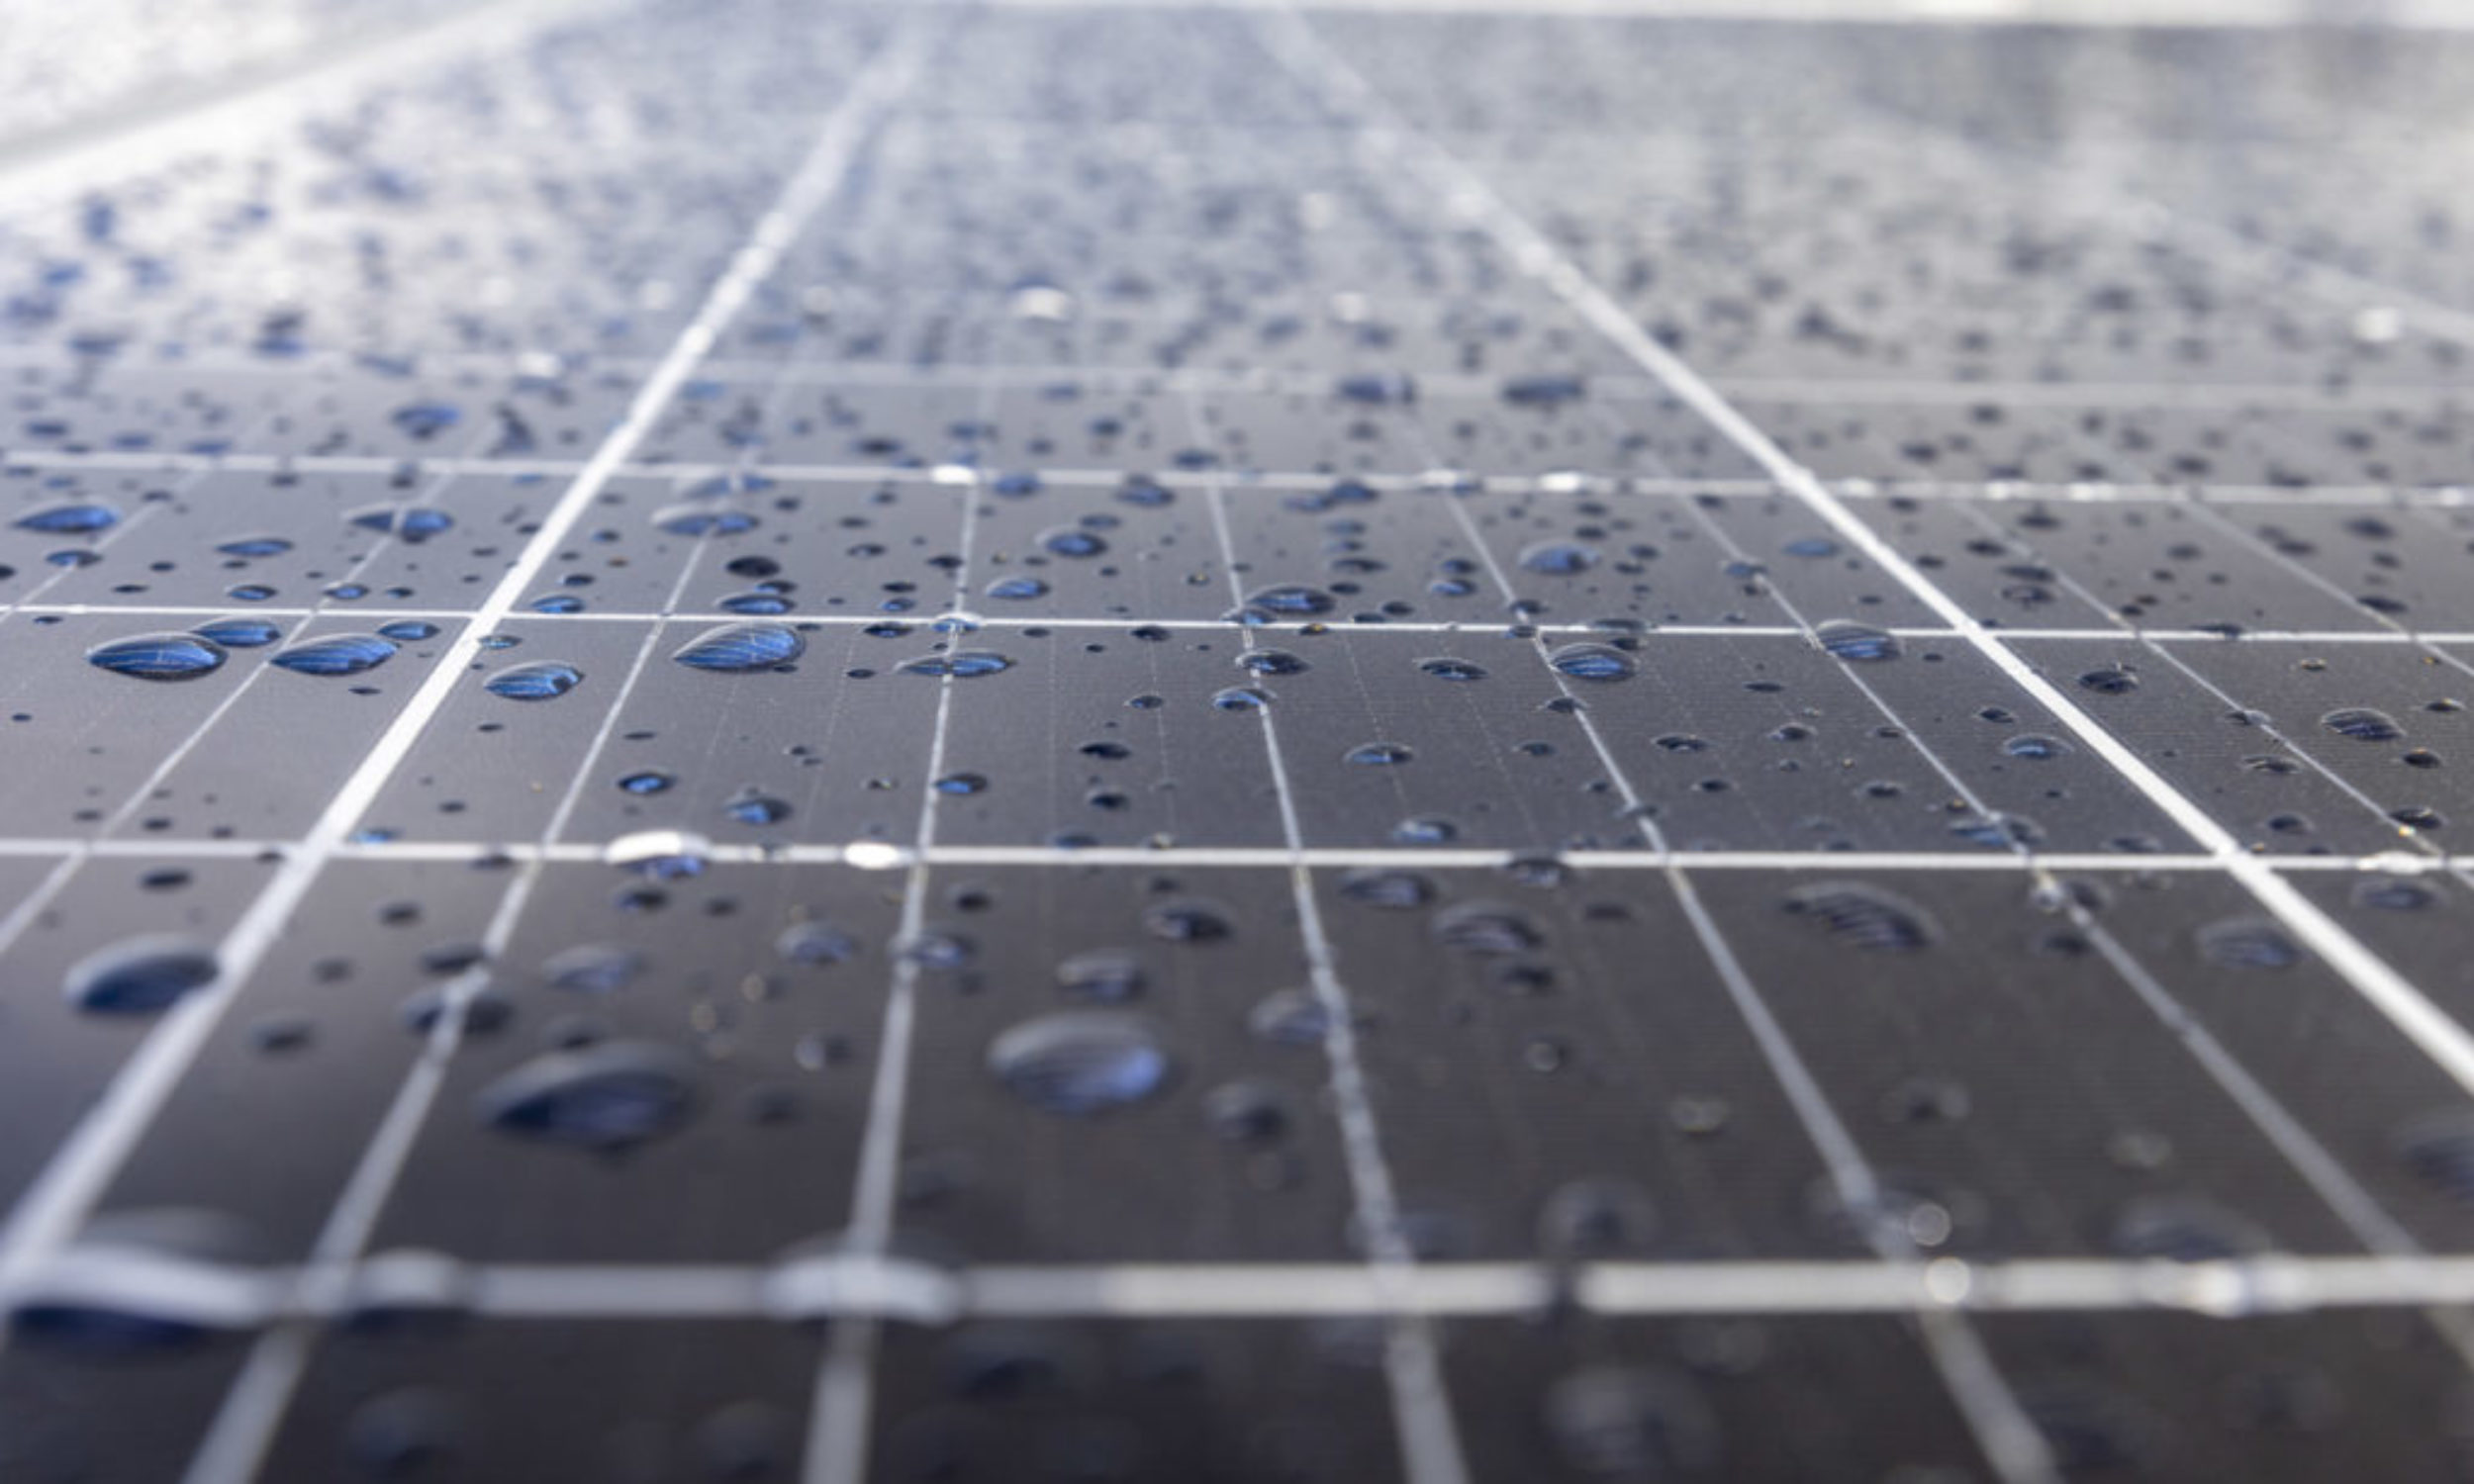 Solar panels on a construction site with raindrops on them